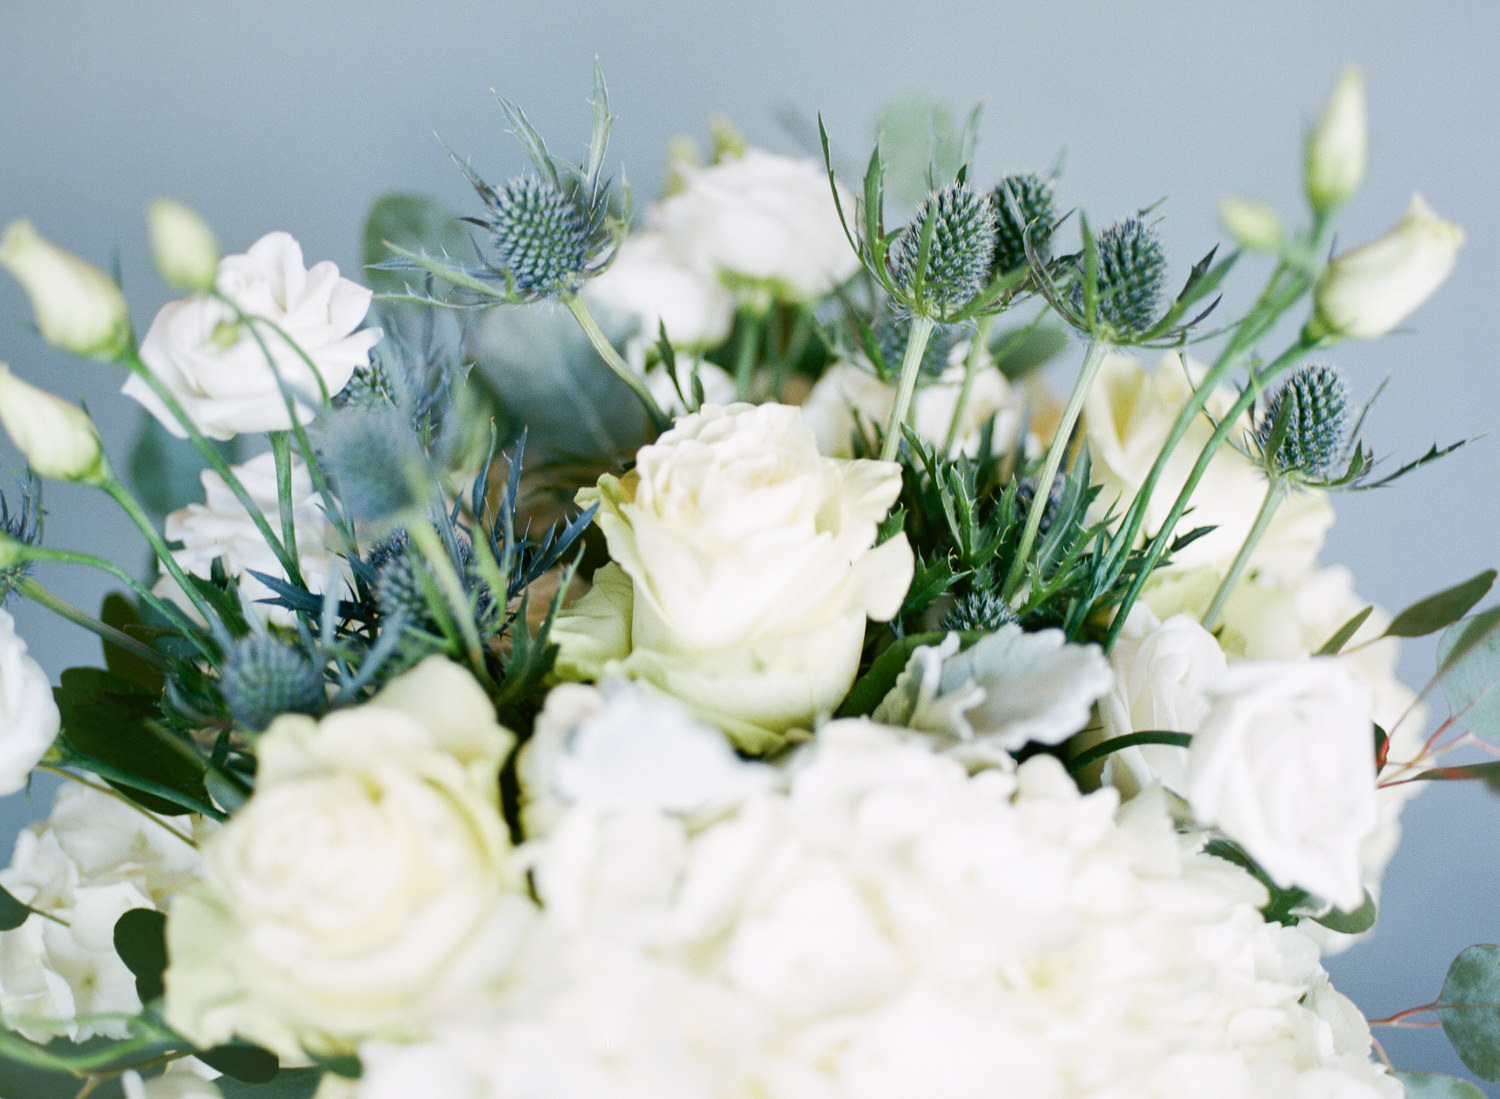 White and dusty blue bridal bouquet, Sisters Floral Design Studio, St. Louis Wedding Photographer Erica Robnett Photography